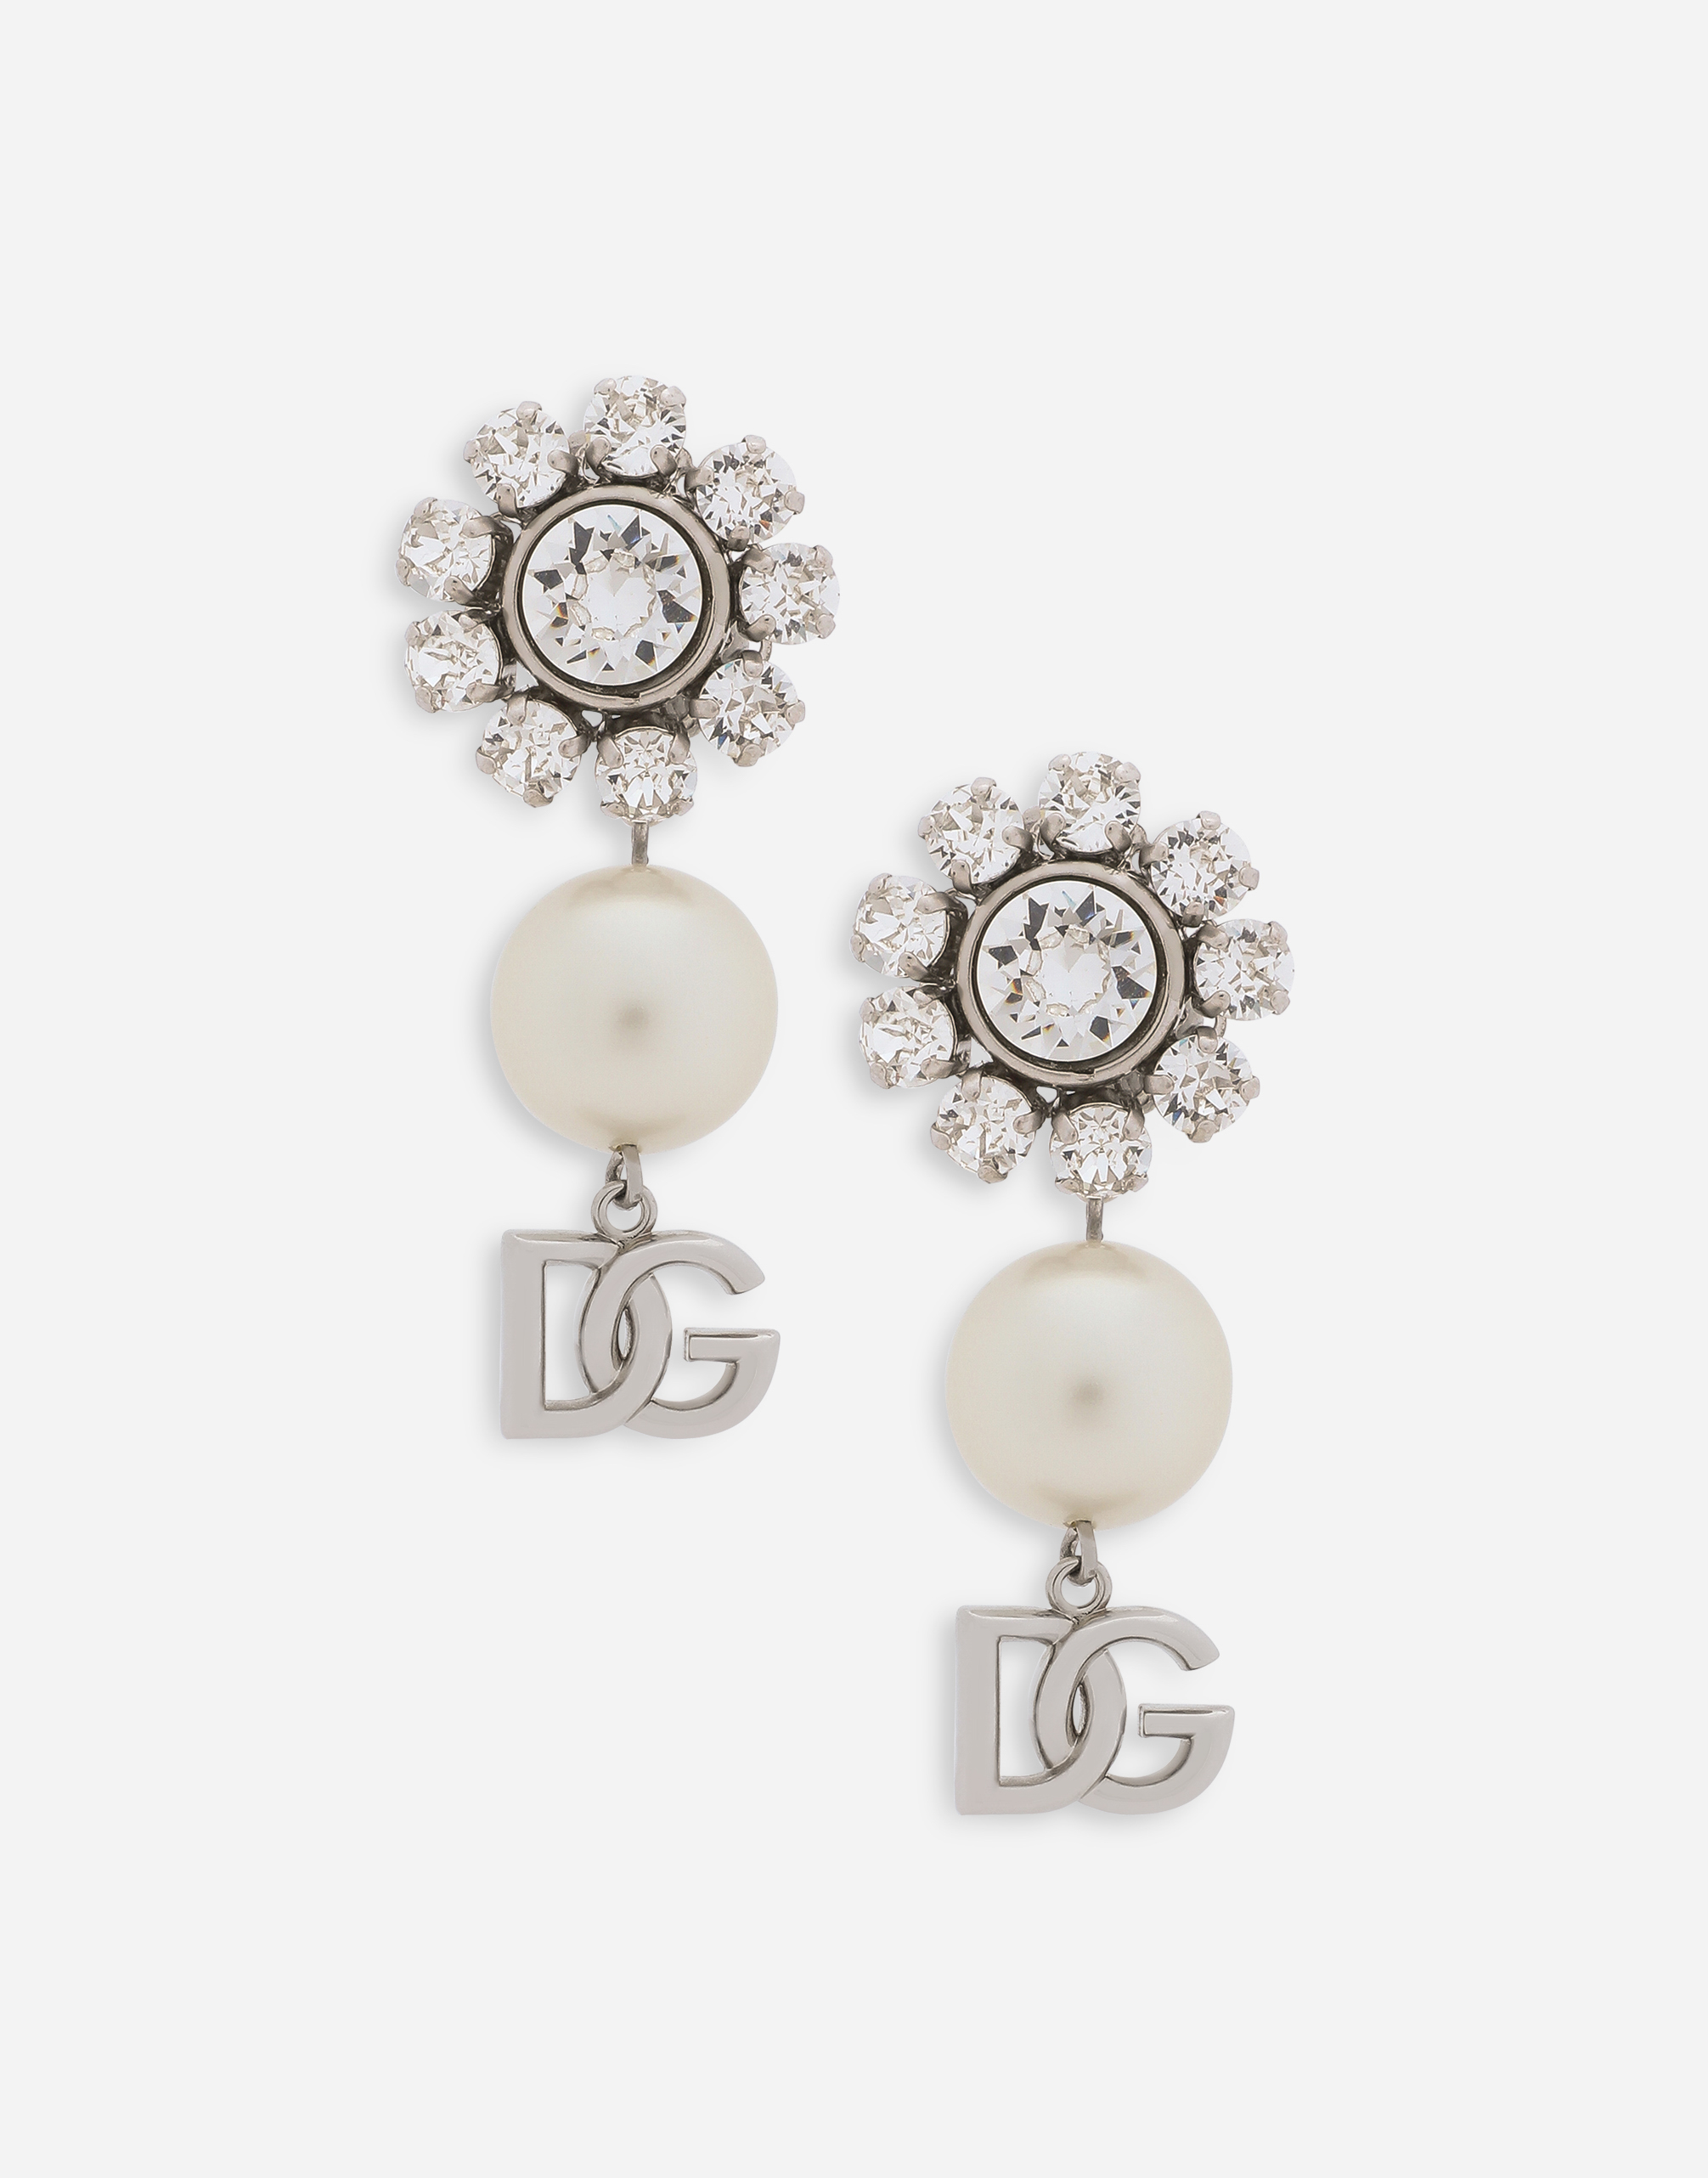 Earrings with rhinestones, pearls and DG logo in Silver